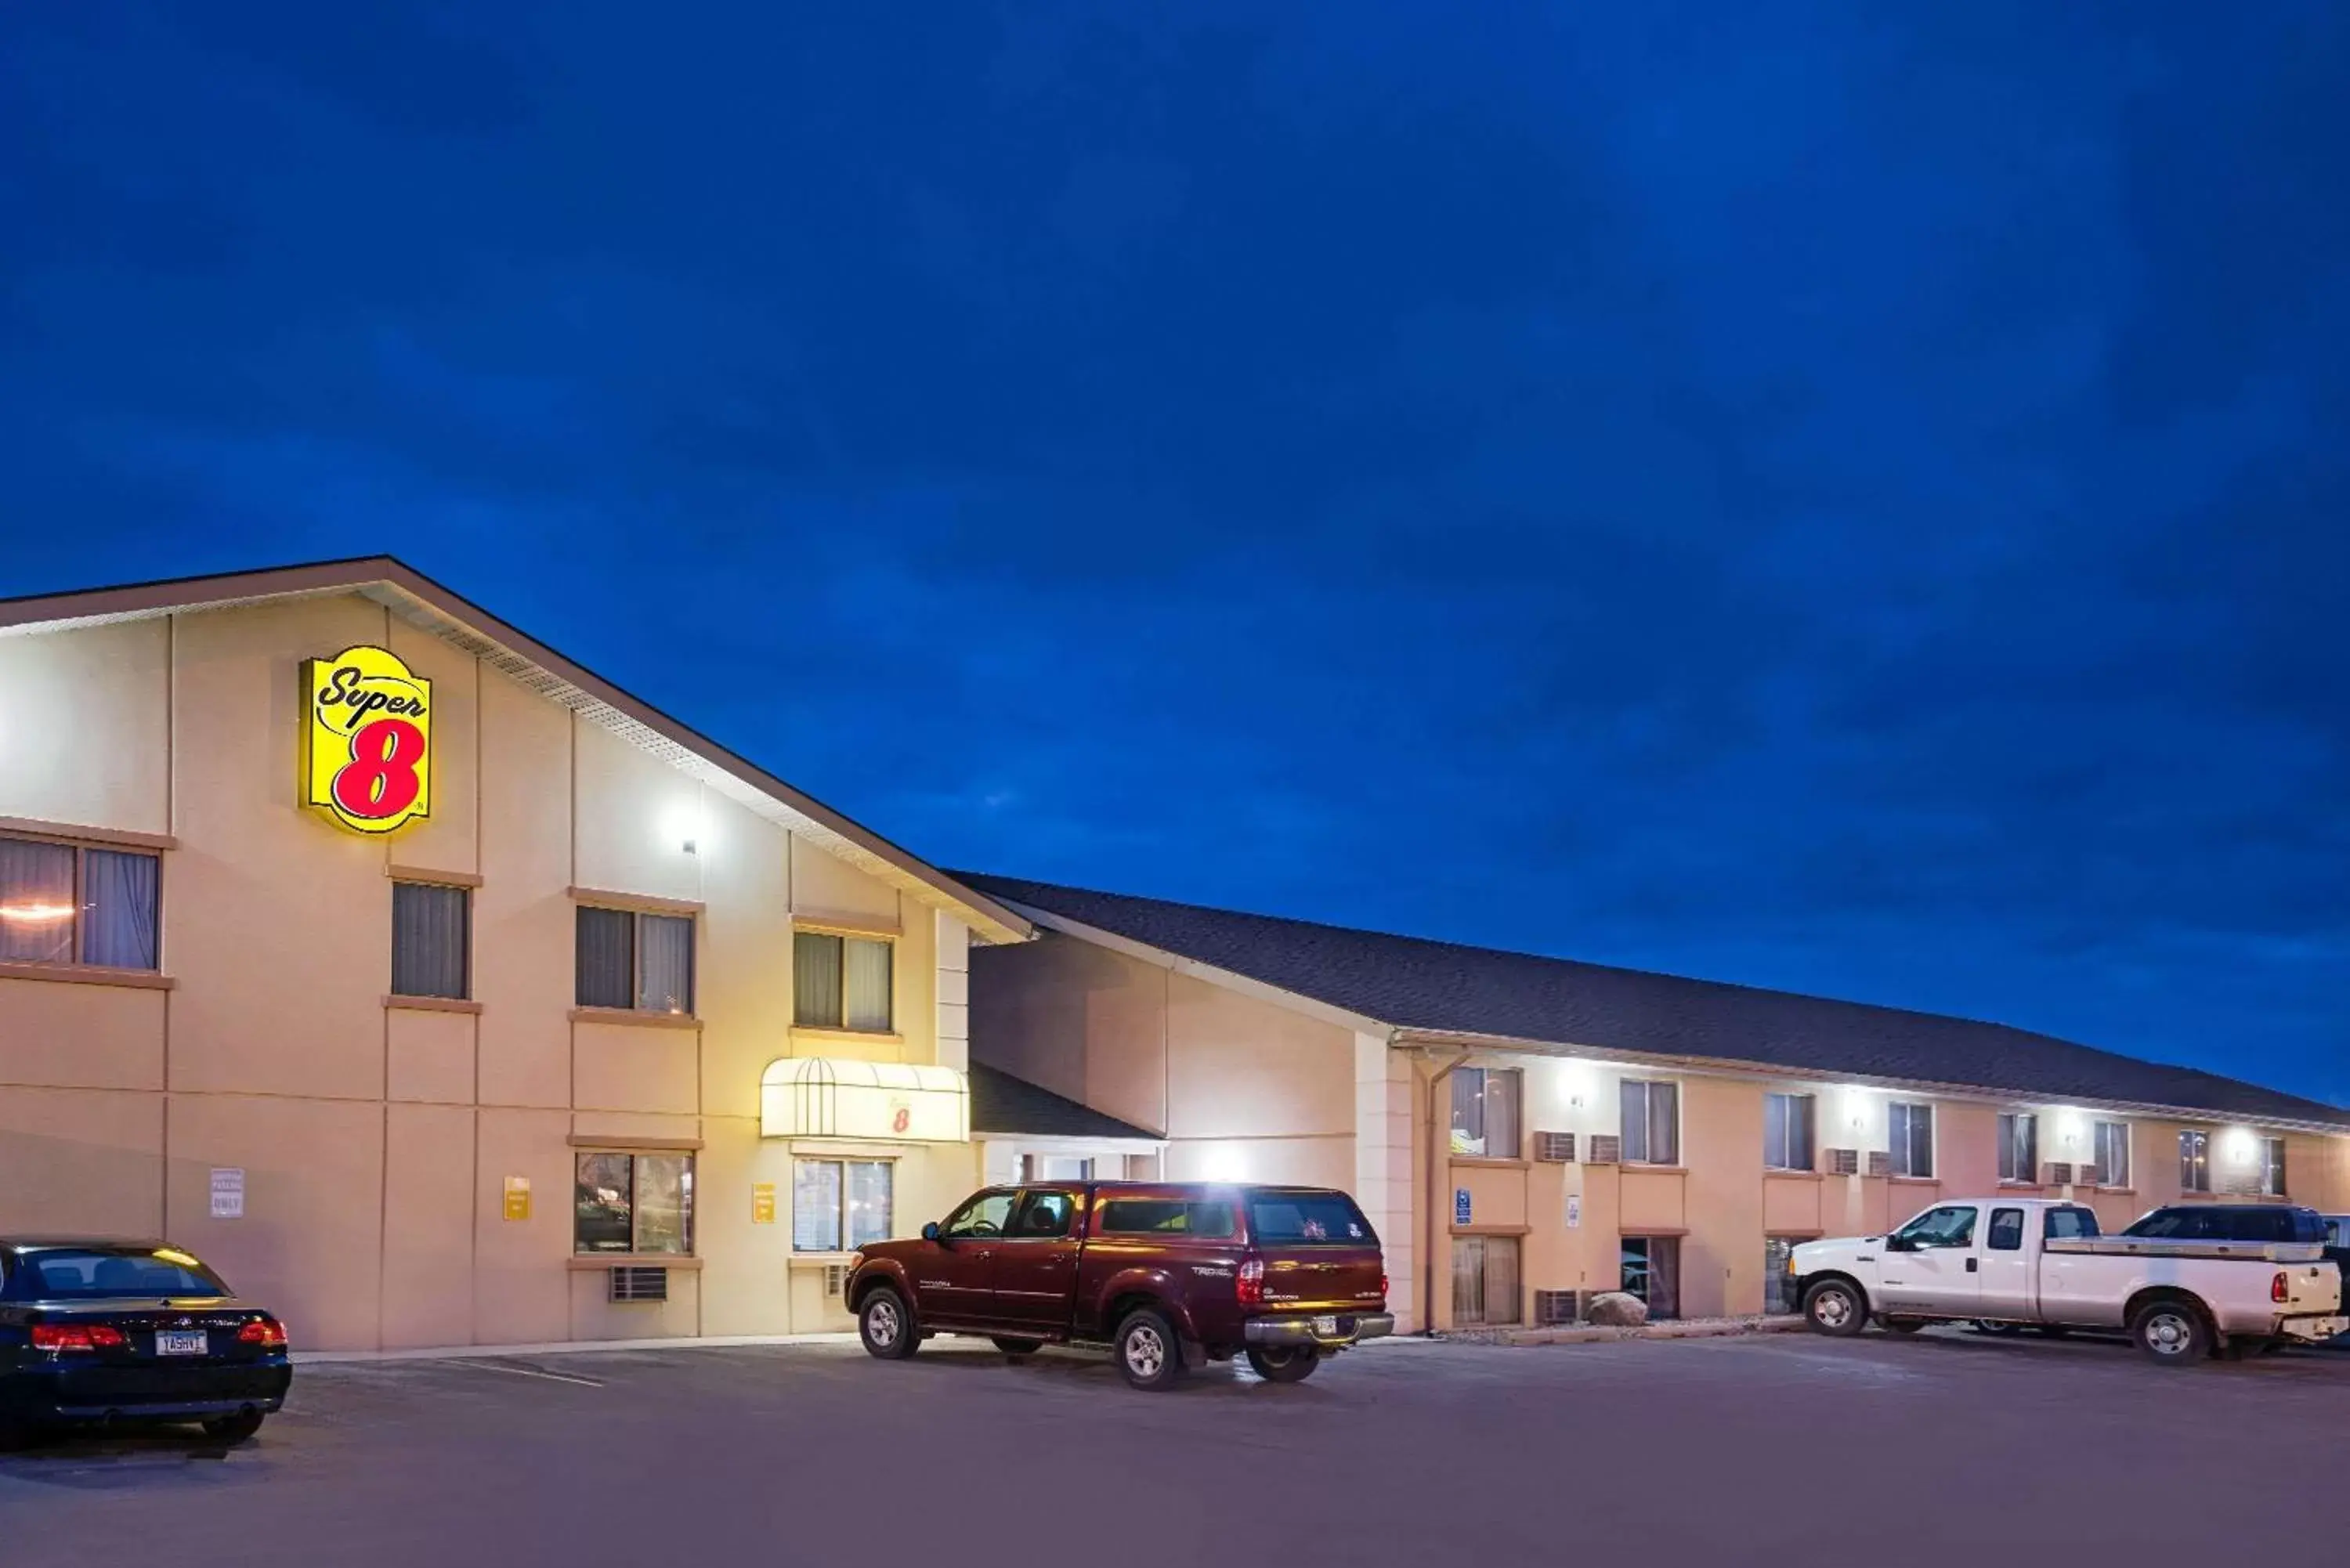 Property Building in Super 8 by Wyndham Marshall MN